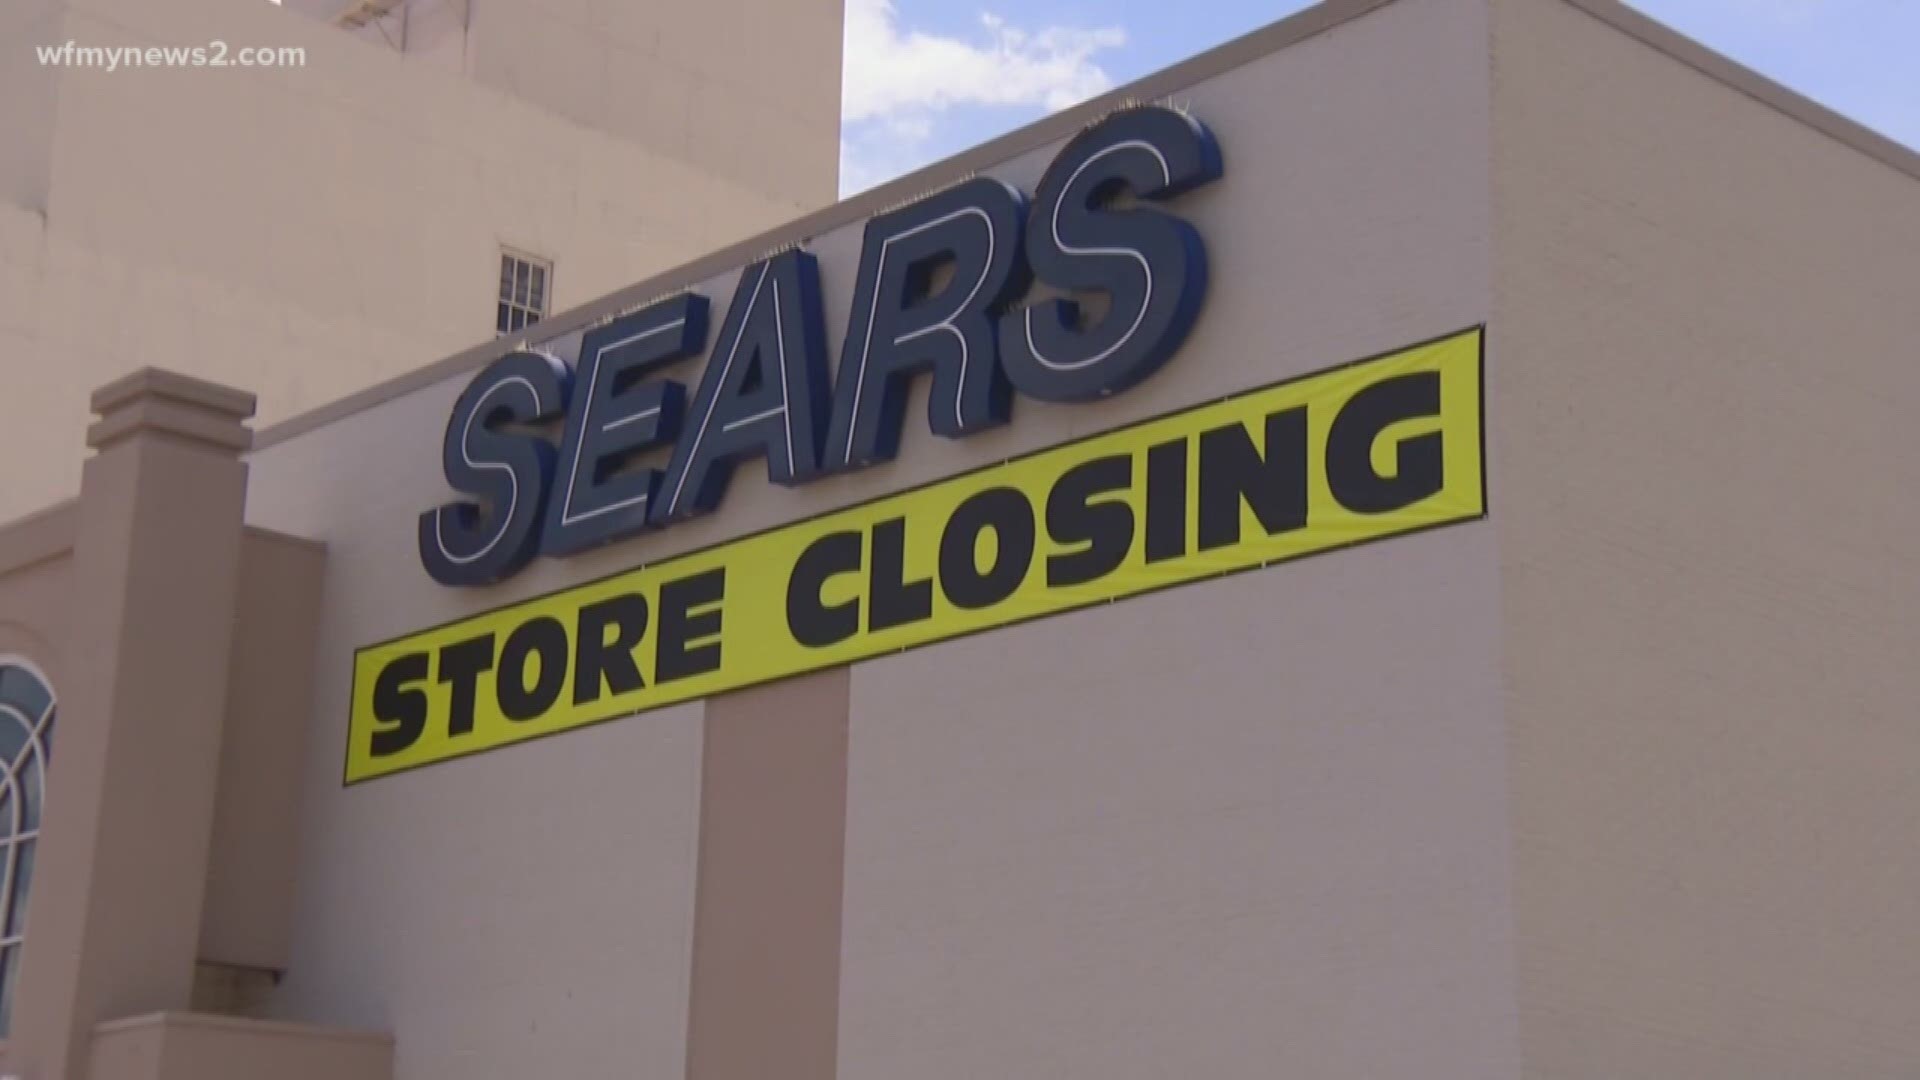 Sears is closing up shop around the country. Here's the latest on locations in the Triad.